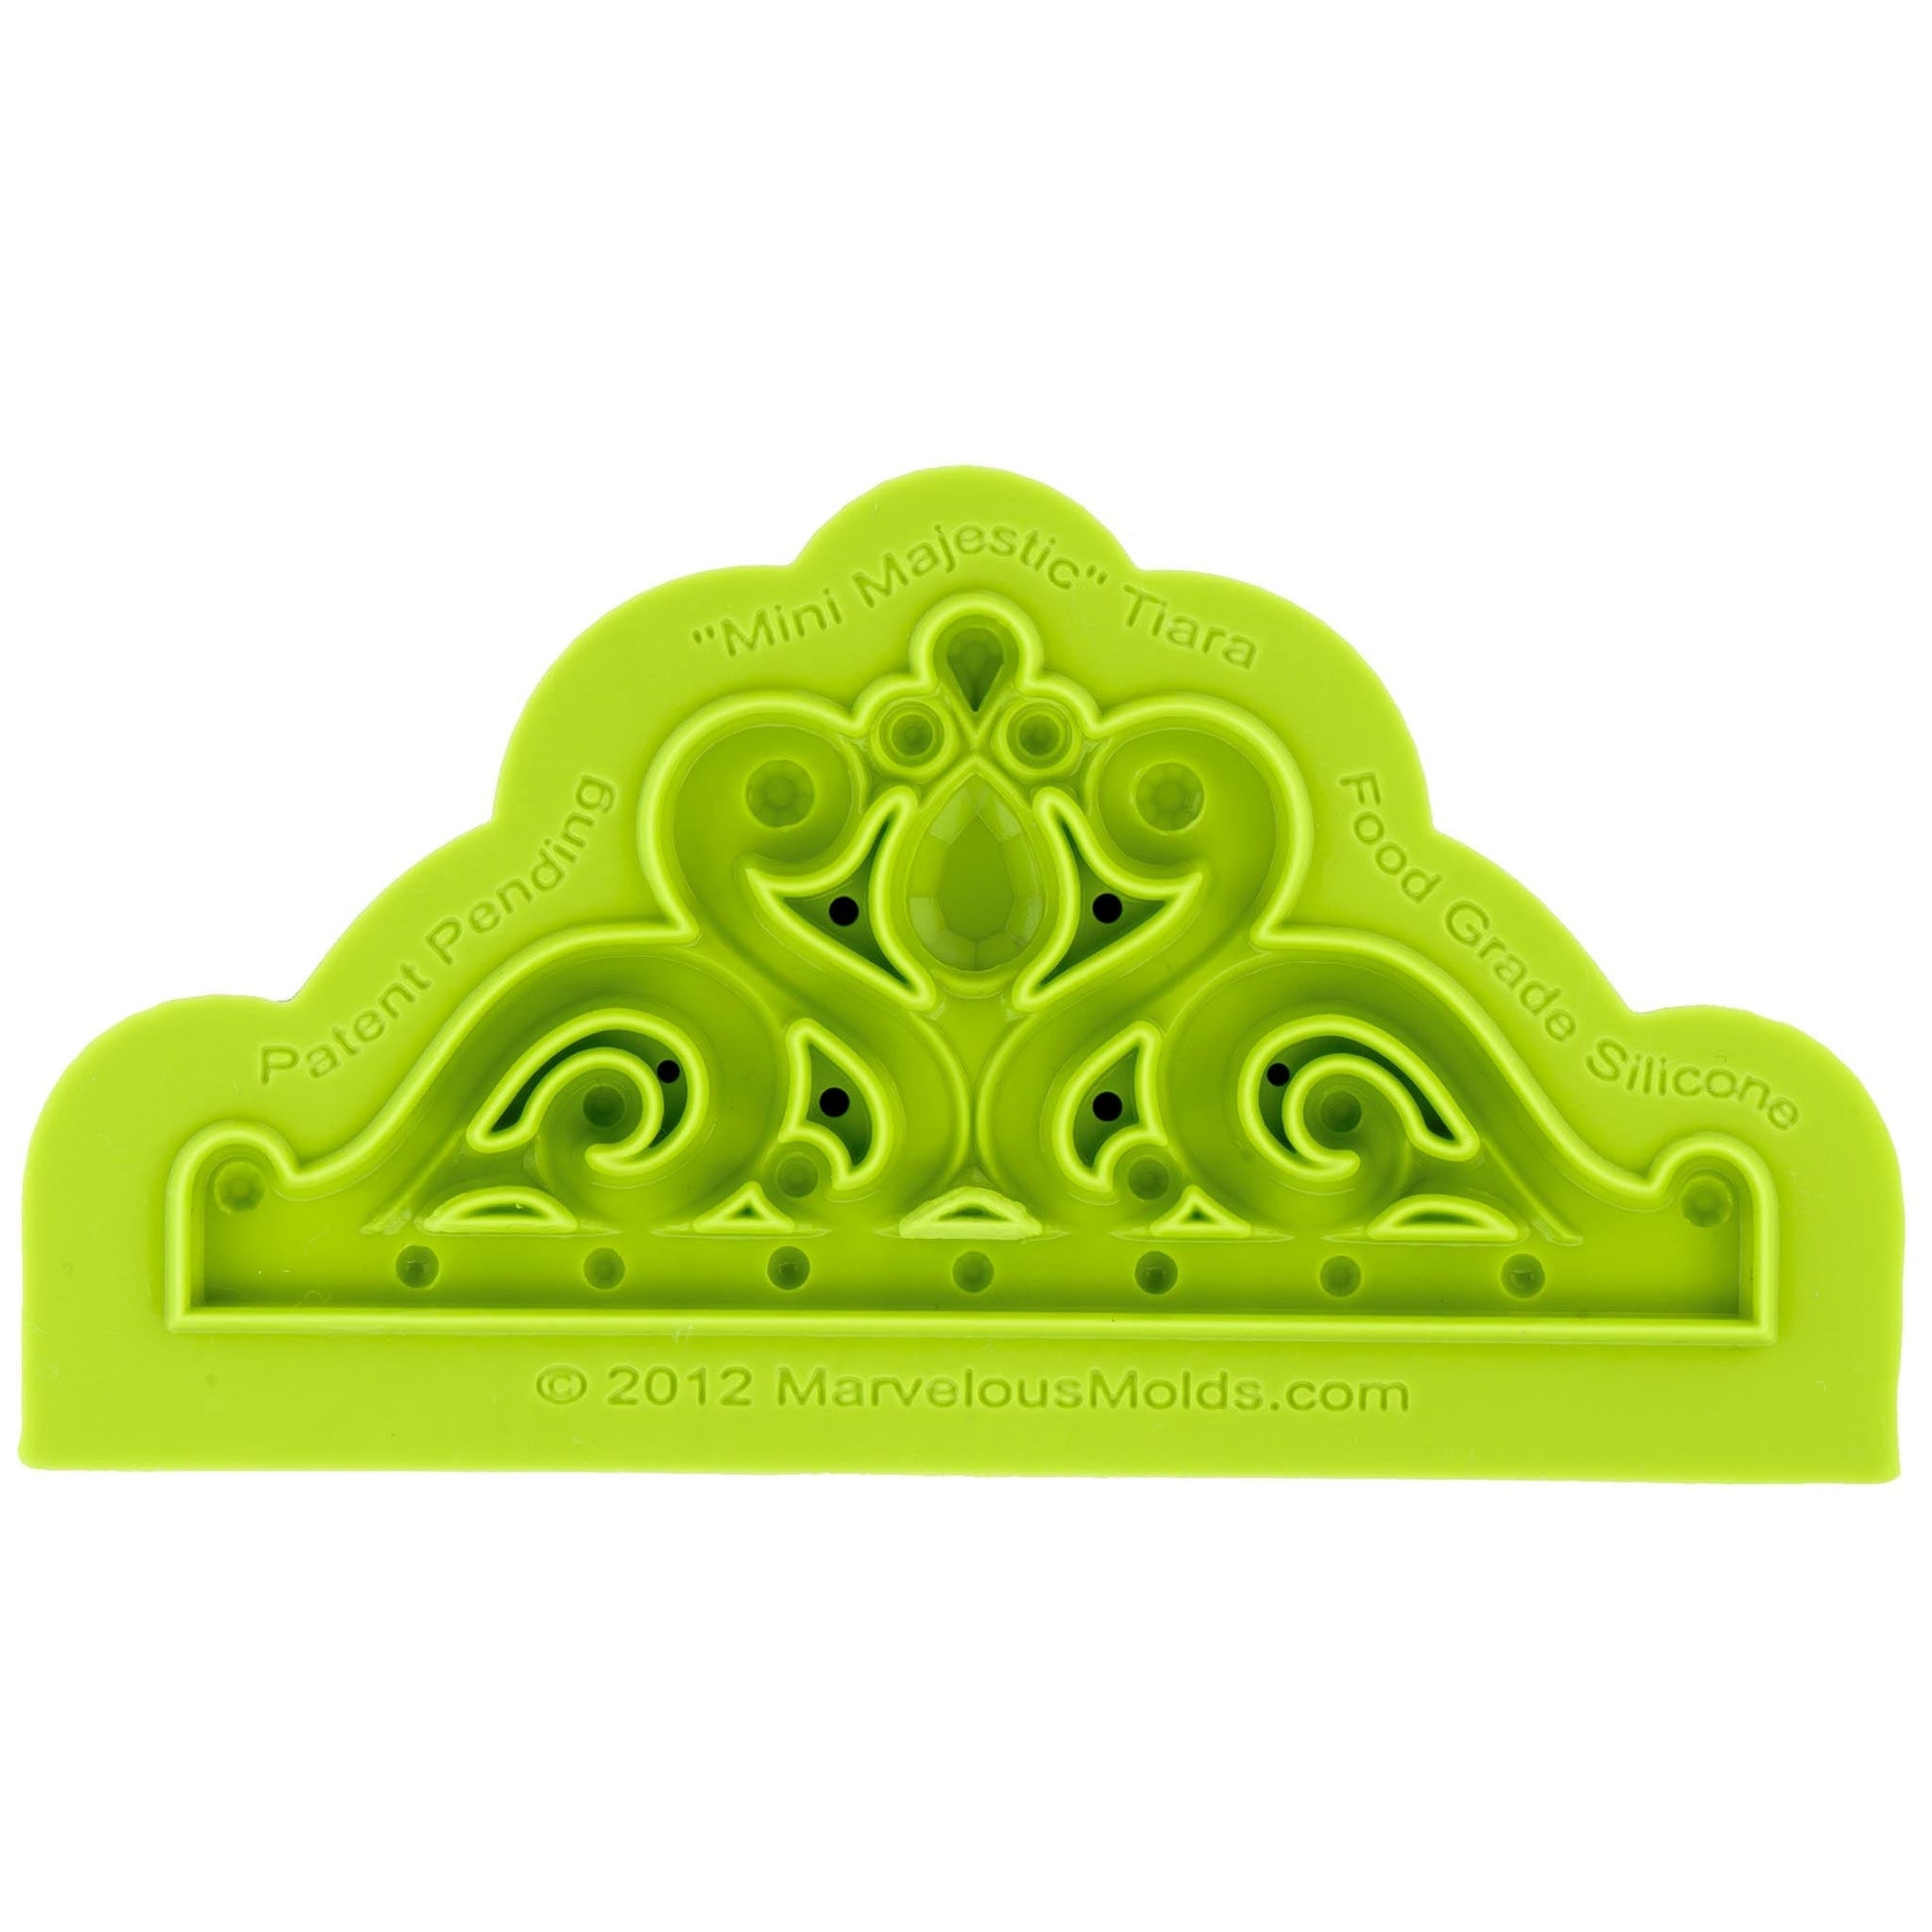 Marvelous Molds Pearl Paragon Silicone Mold for Cake Decorating with Fondant | Gum Paste and More